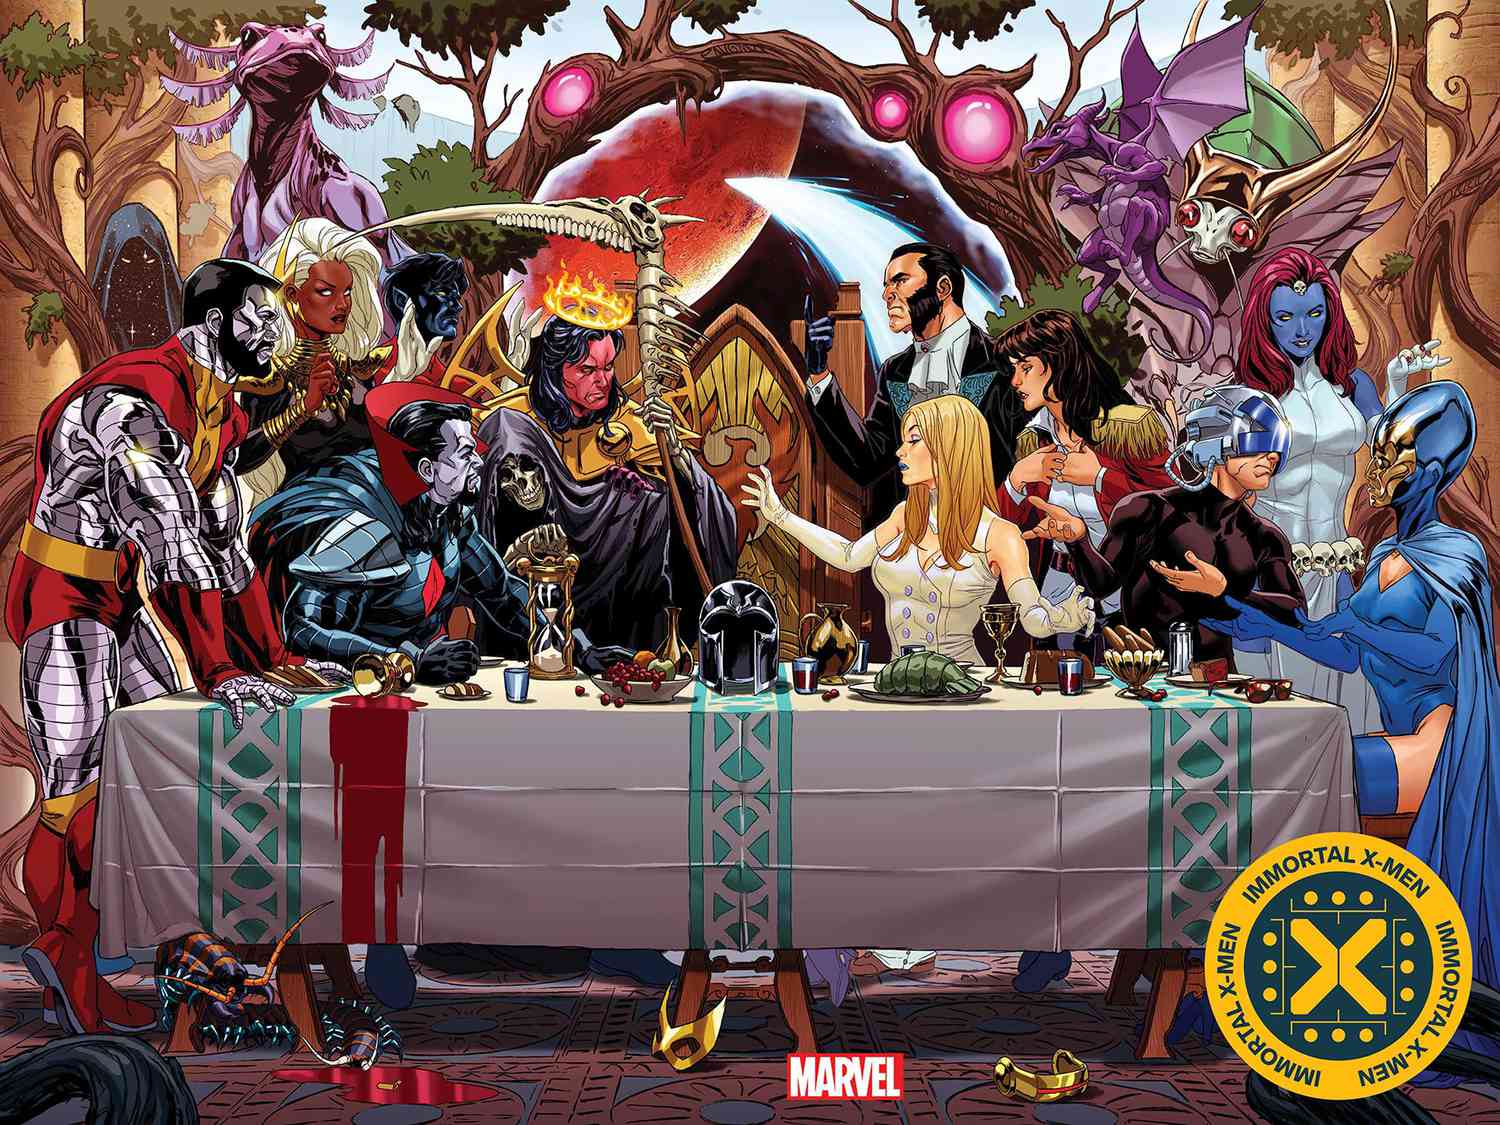 The Quiet Council stars on the cover of 'Immortal X-Men' #1, by Kieron Gillen and Lucas Werneck